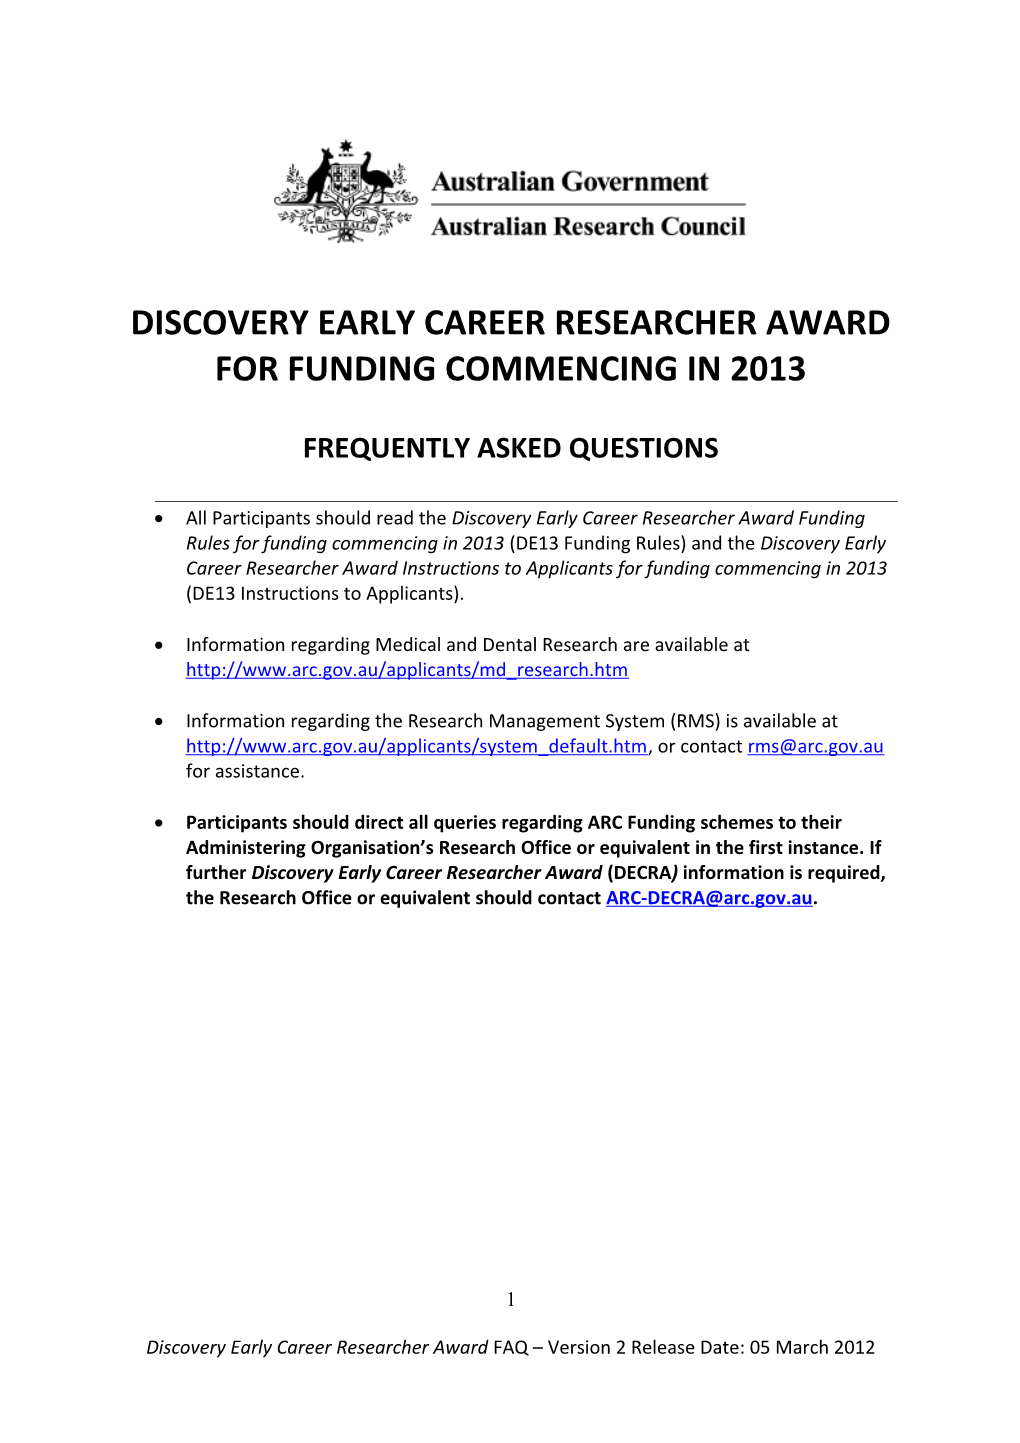 Discovery Early Career Researcher Award for Funding Commencing in 2012 - Frequently Asked